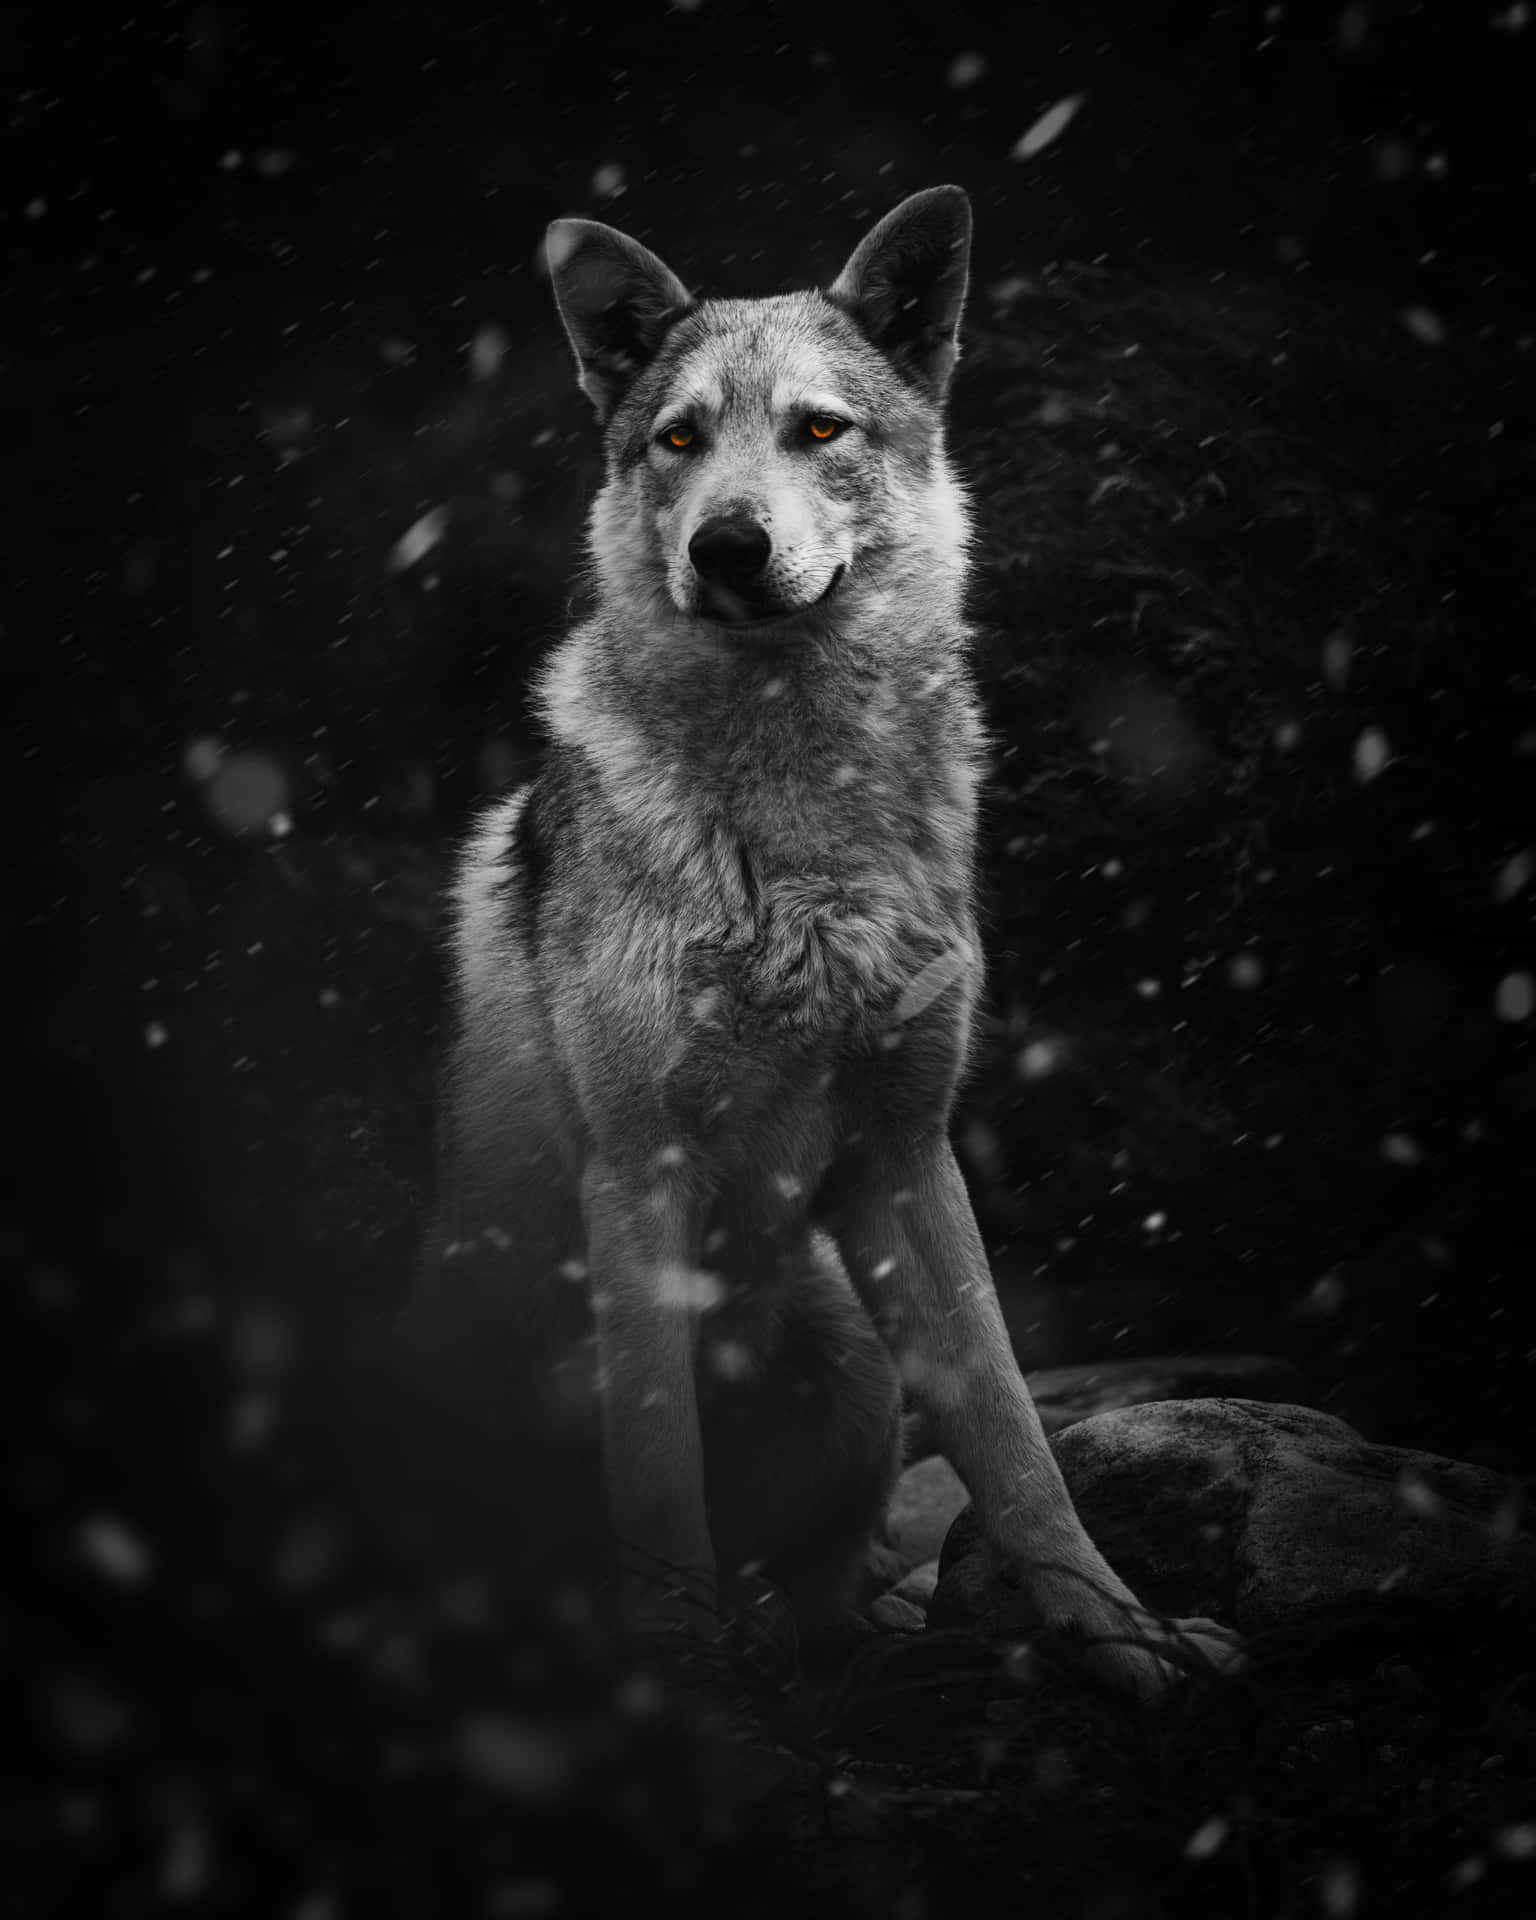 A beautiful wolf serenely surveys his surroundings. Wallpaper